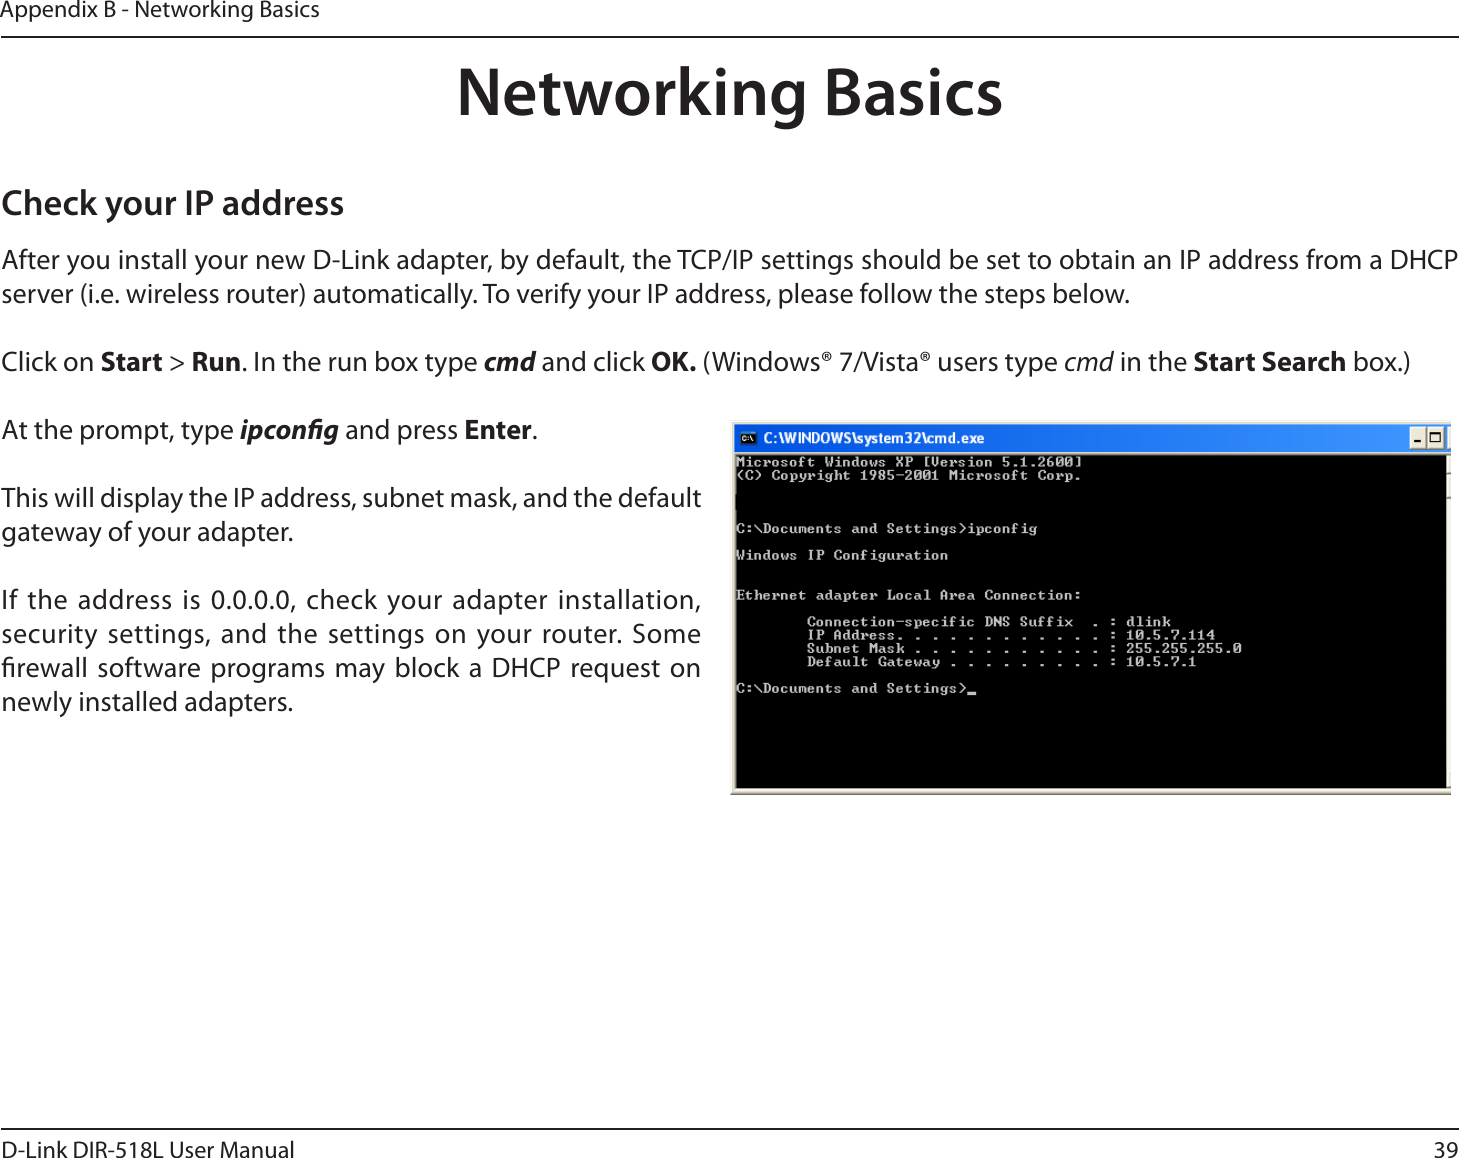 39D-Link DIR-518L User ManualAppendix B - Networking BasicsNetworking BasicsCheck your IP addressAfter you install your new D-Link adapter, by default, the TCP/IP settings should be set to obtain an IP address from a DHCP server (i.e. wireless router) automatically. To verify your IP address, please follow the steps below.Click on Start &gt; Run. In the run box type cmd and click OK. (Windows® 7/Vista® users type cmd in the Start Search box.)At the prompt, type ipcong and press Enter.This will display the IP address, subnet mask, and the default gateway of your adapter.If the address is 0.0.0.0, check your adapter installation, security settings, and the settings on your router. Some rewall software programs may block a DHCP request on newly installed adapters. 